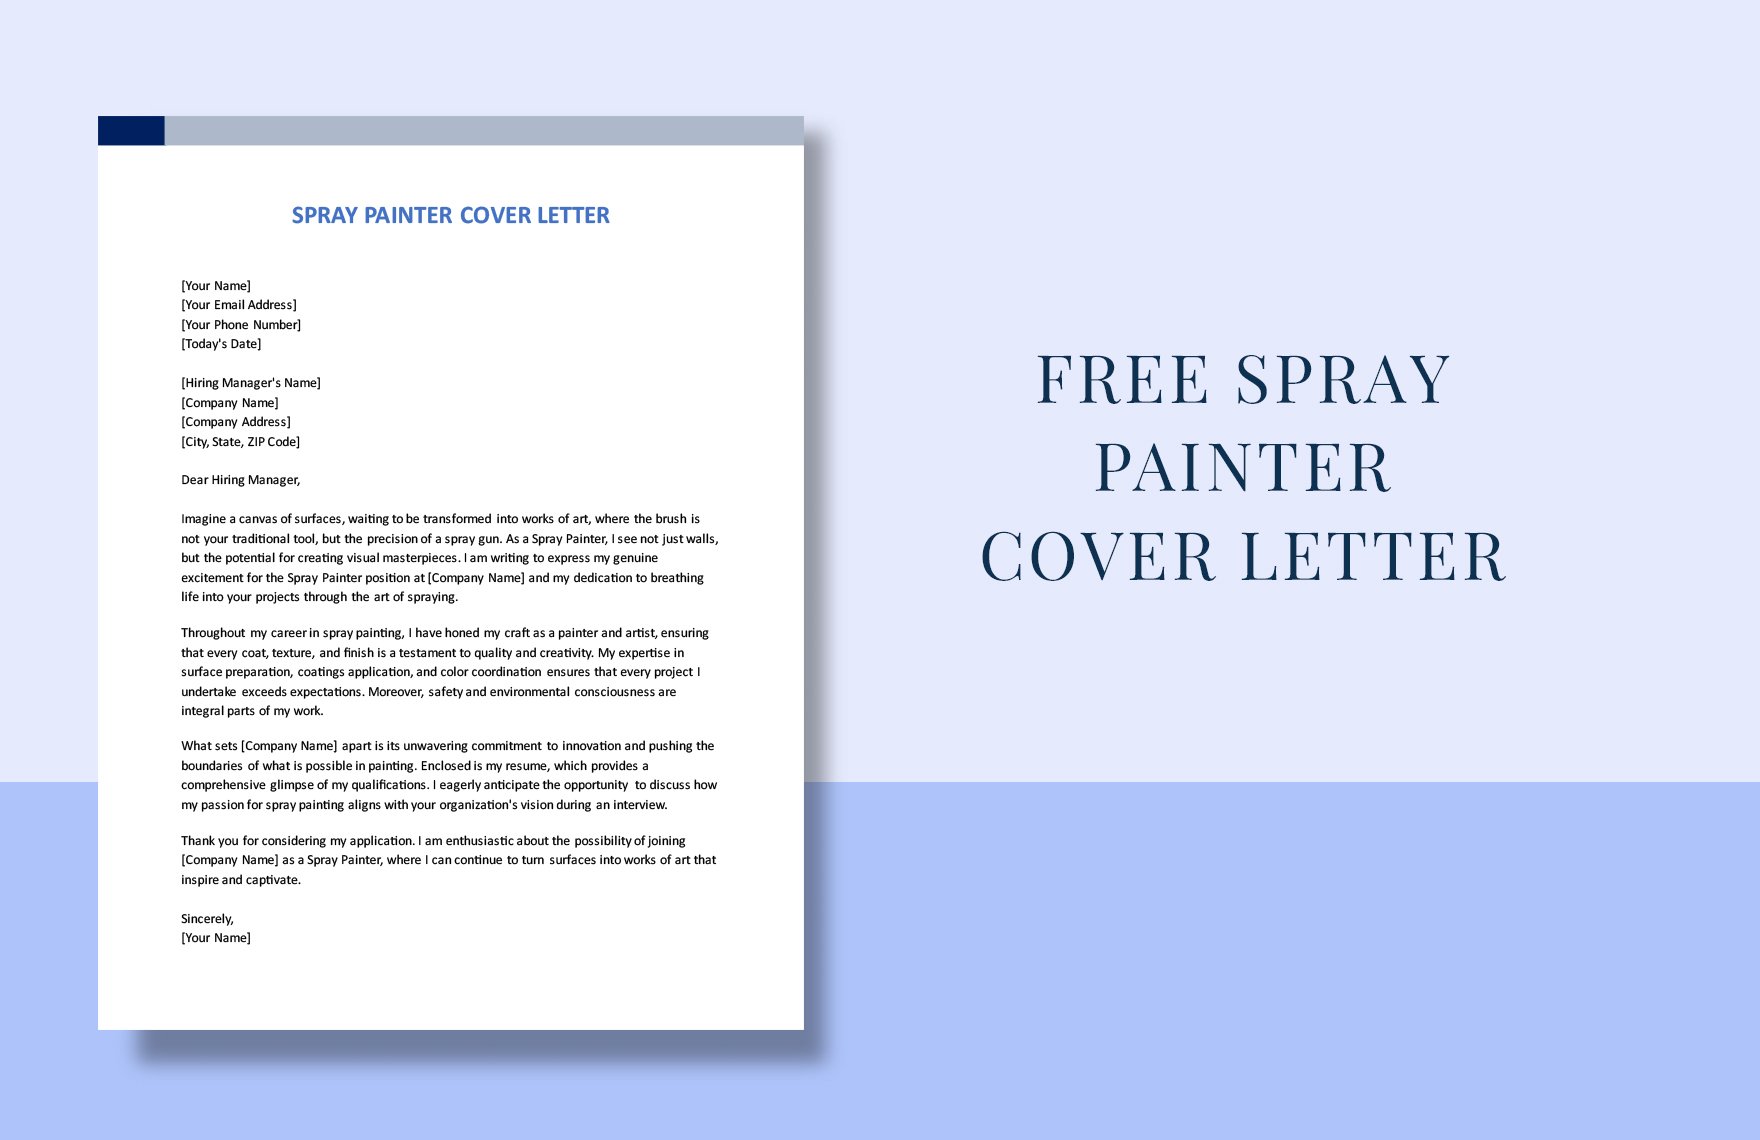 Spray Painter Cover Letter in Word, Google Docs, PDF